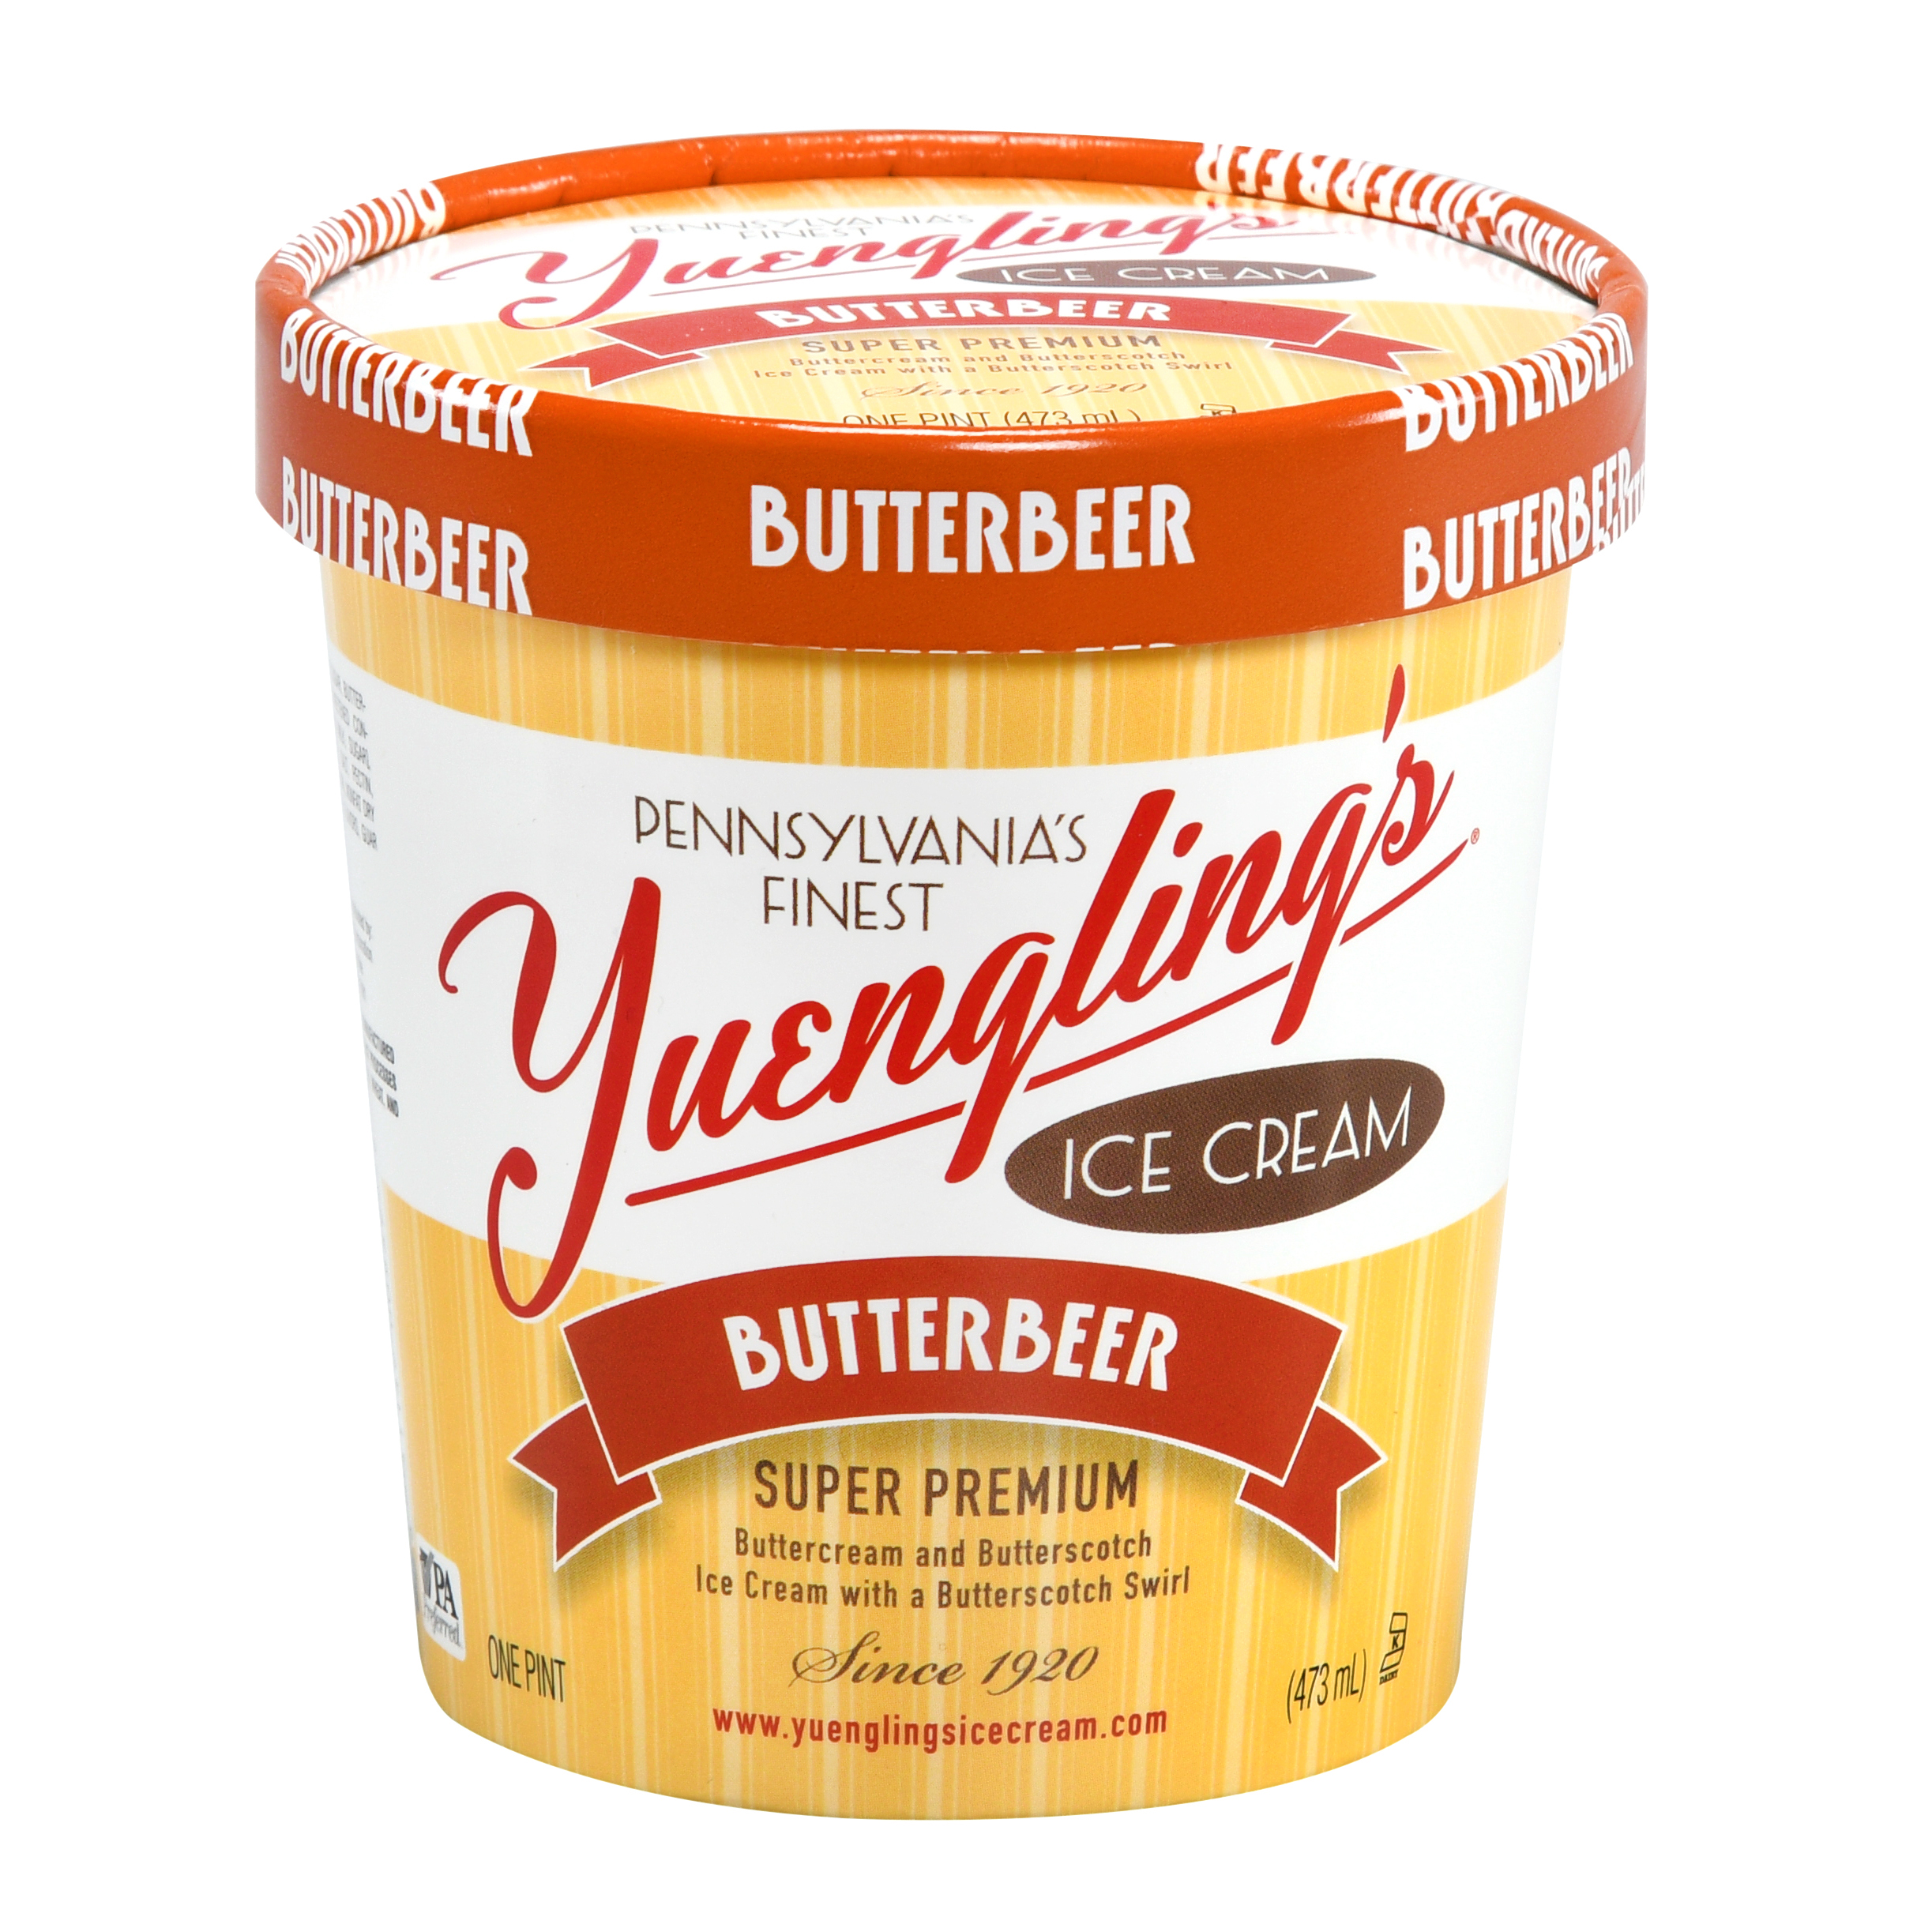 Yuenglings Ice Cream Yuengling Butterbeer Pint - image 1 of 2